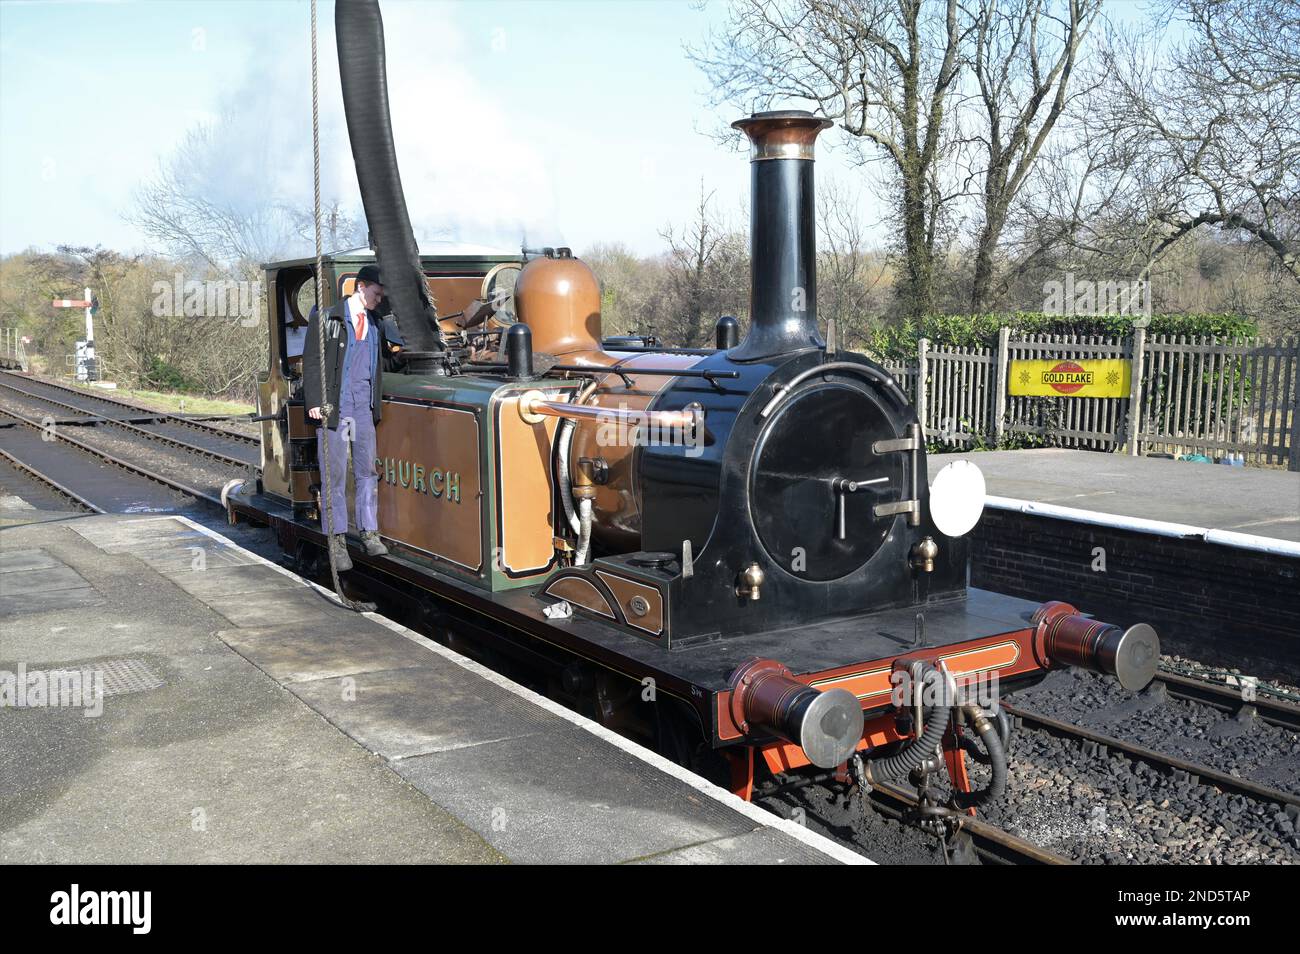 Fenchurch a Terrier locomotive taking water at Sheffield Park station. Stock Photo